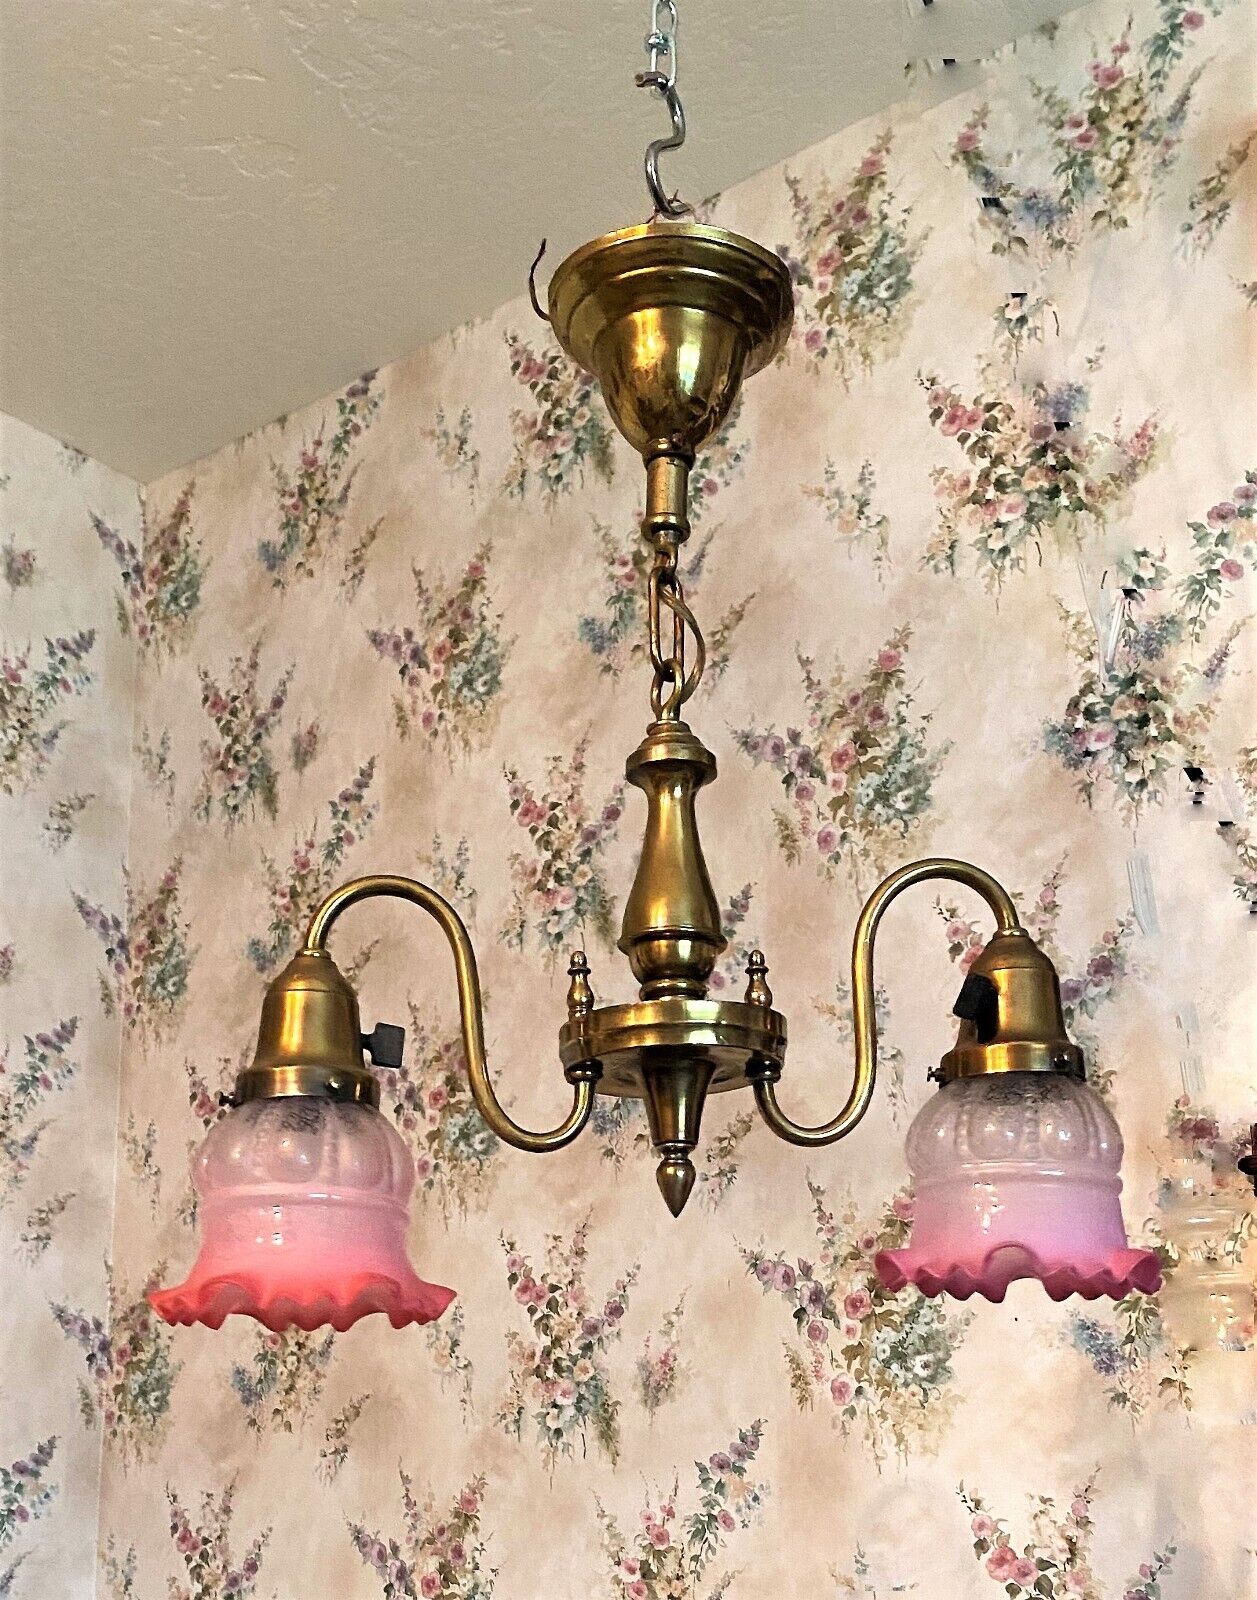 ANTIQUE TWO-ARMED HANGING LAMP/ LIGHT/ CHANDELIER w/ CRANBERRY SHADES